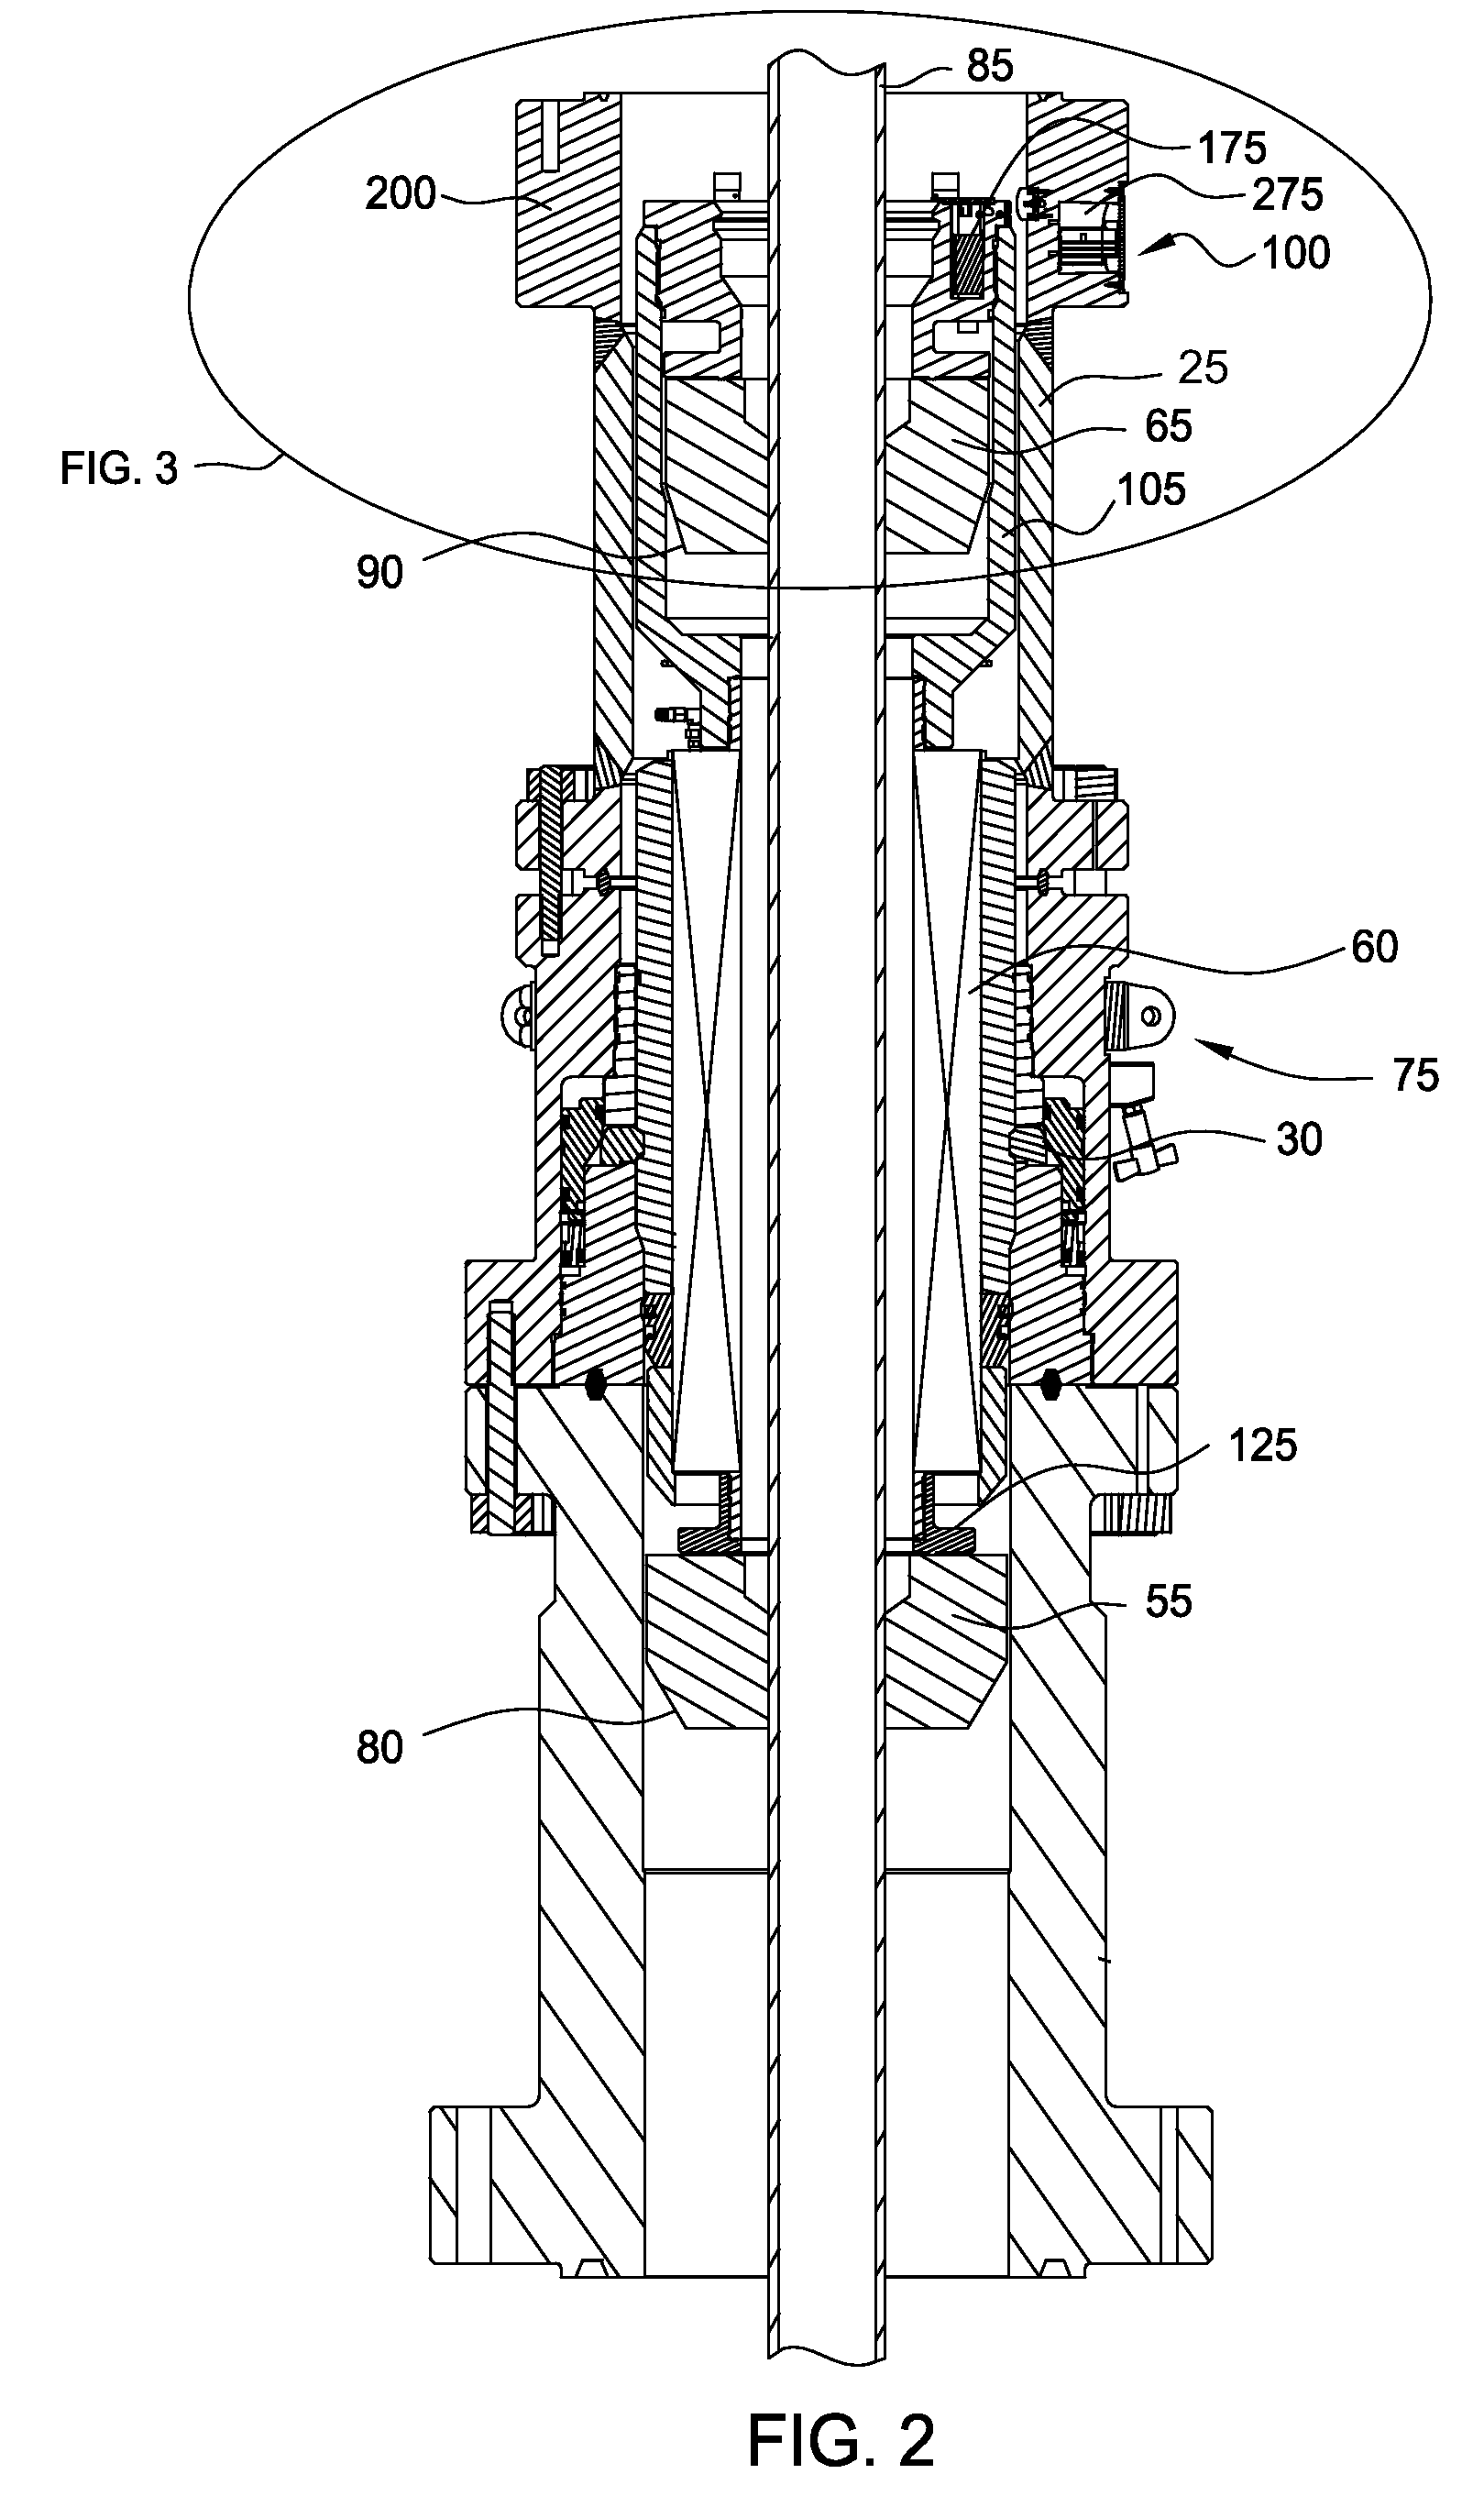 Apparatus and Method for Data Transmission from a Rotating Control Device